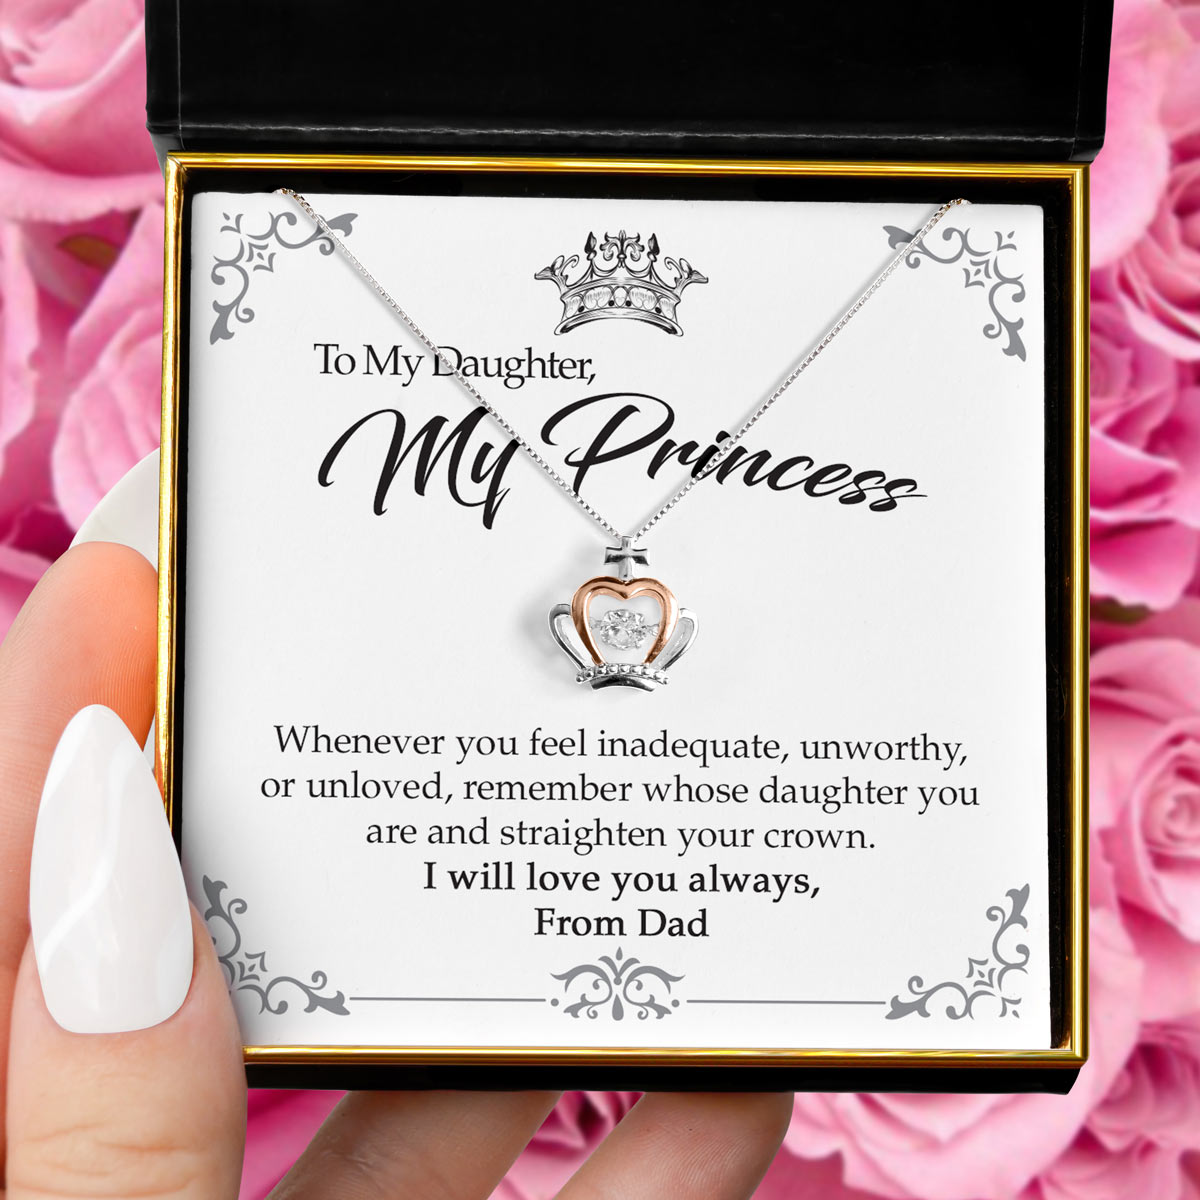 To My Daughter, My Princess - Luxe Crown Necklace Gift Set